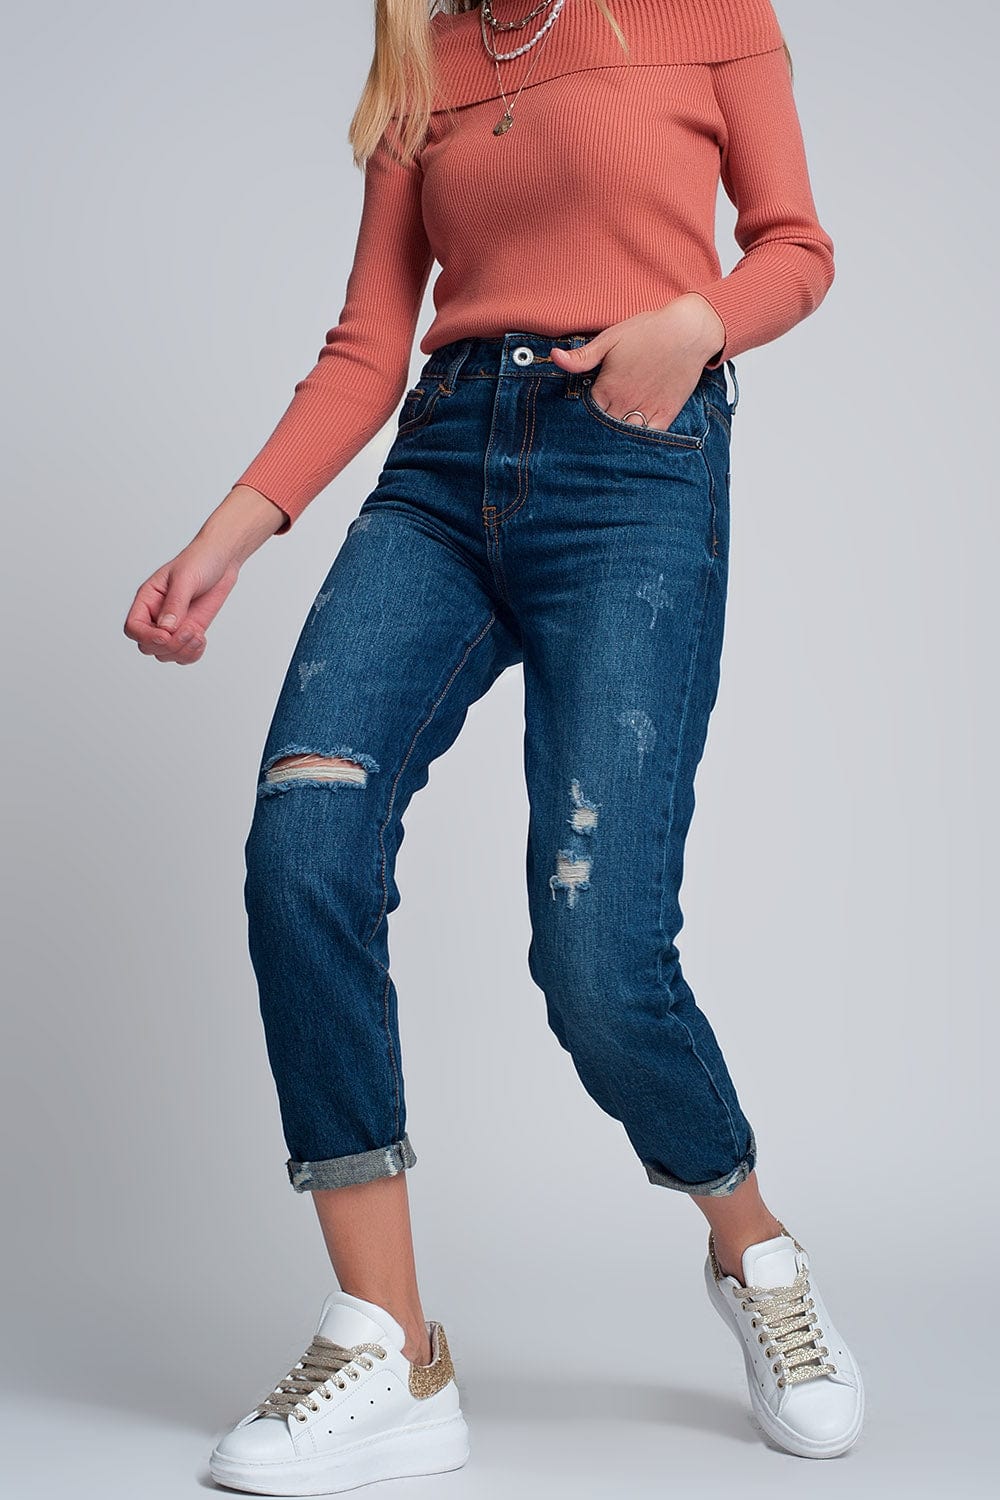 Q2 Women's Jean High Rise Slim Mom Jeans in Blue Wash with Front Rips